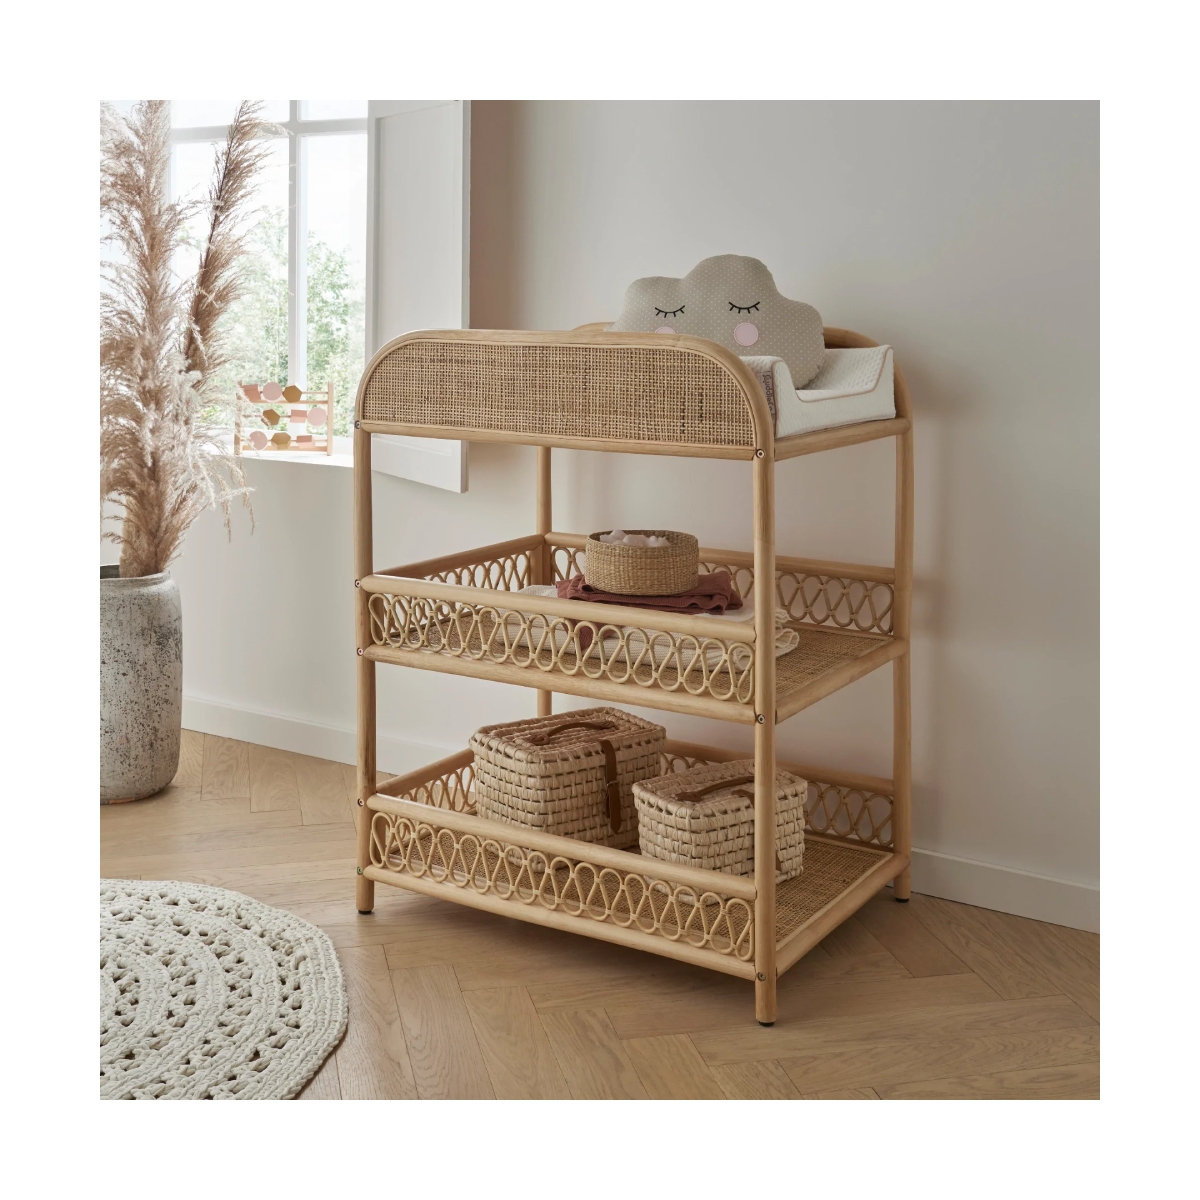 CuddleCo Aria Rattan Changing Table